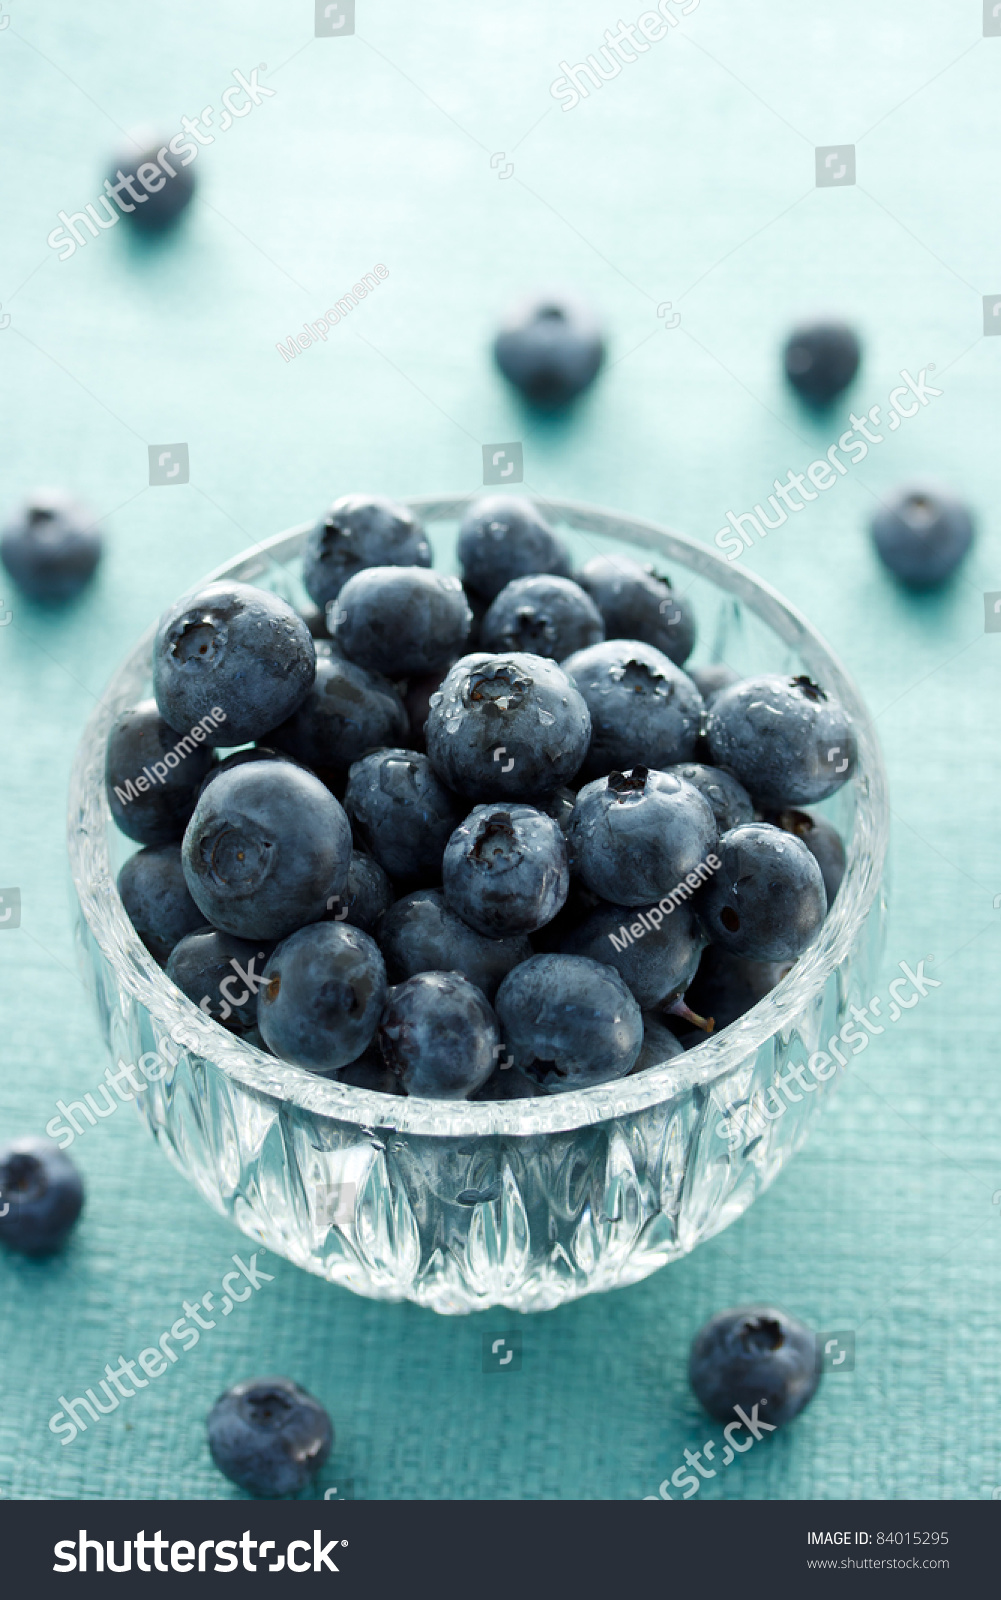 Fresh Blueberries In Glass Cup Stock Photo 84015295 : Shutterstock